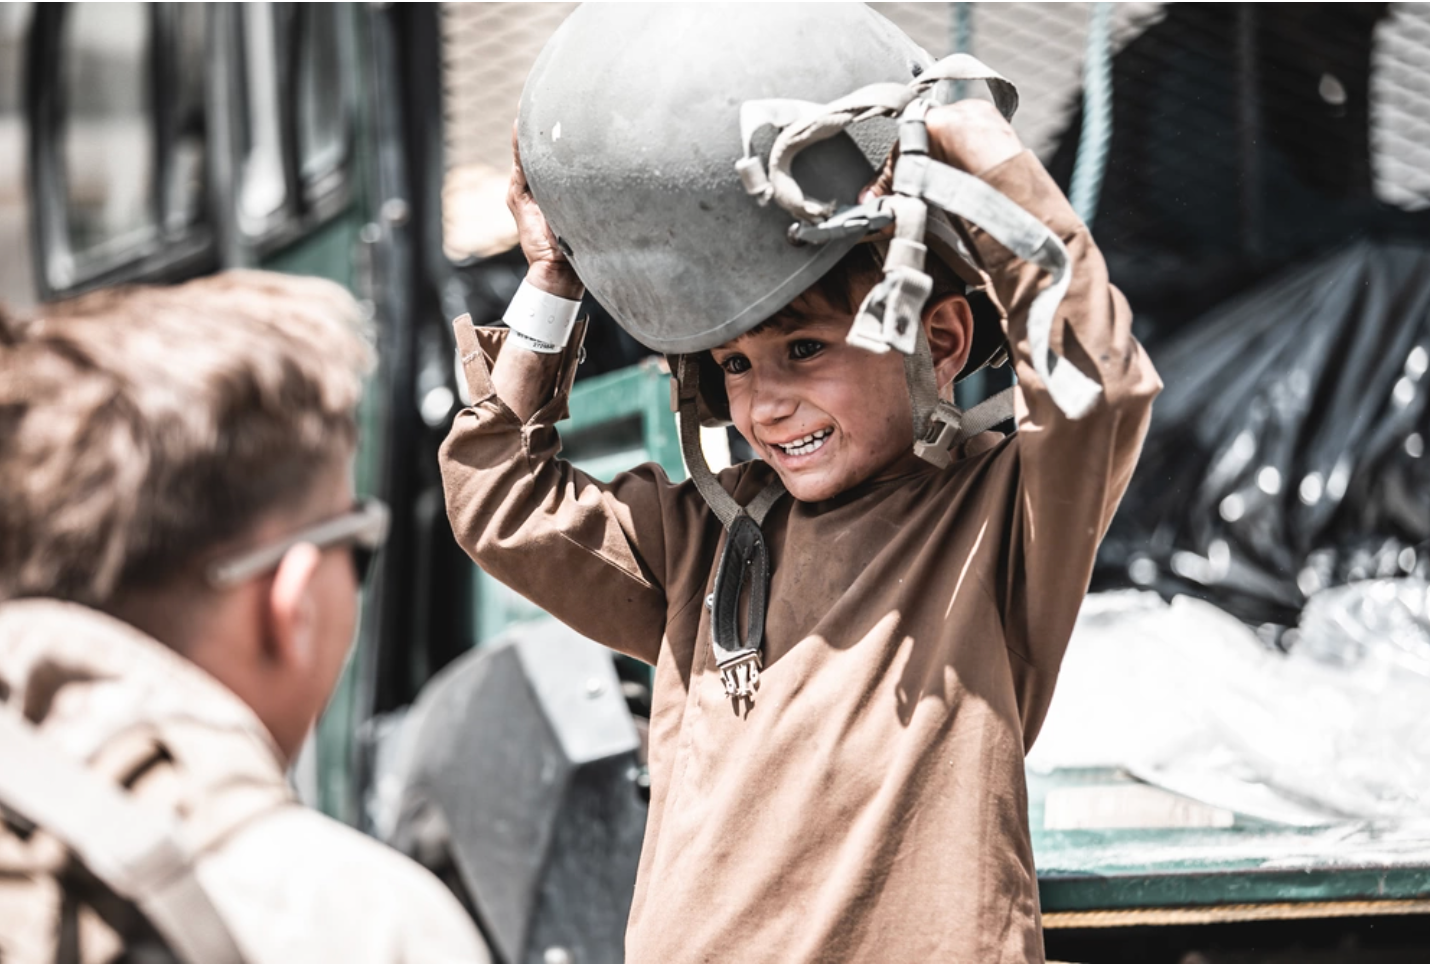 A U.S. Marine assigned to Special Purpose Marine Air-Ground Task Force – Crisis Response – Central Command hands a helmet to a child awaiting evacuation at Hamid Karzai International Airport, Afghanistan, Aug. 22, 2021. (U.S. Marine Corps photo by Gunnery Sgt. Melissa Marnell).